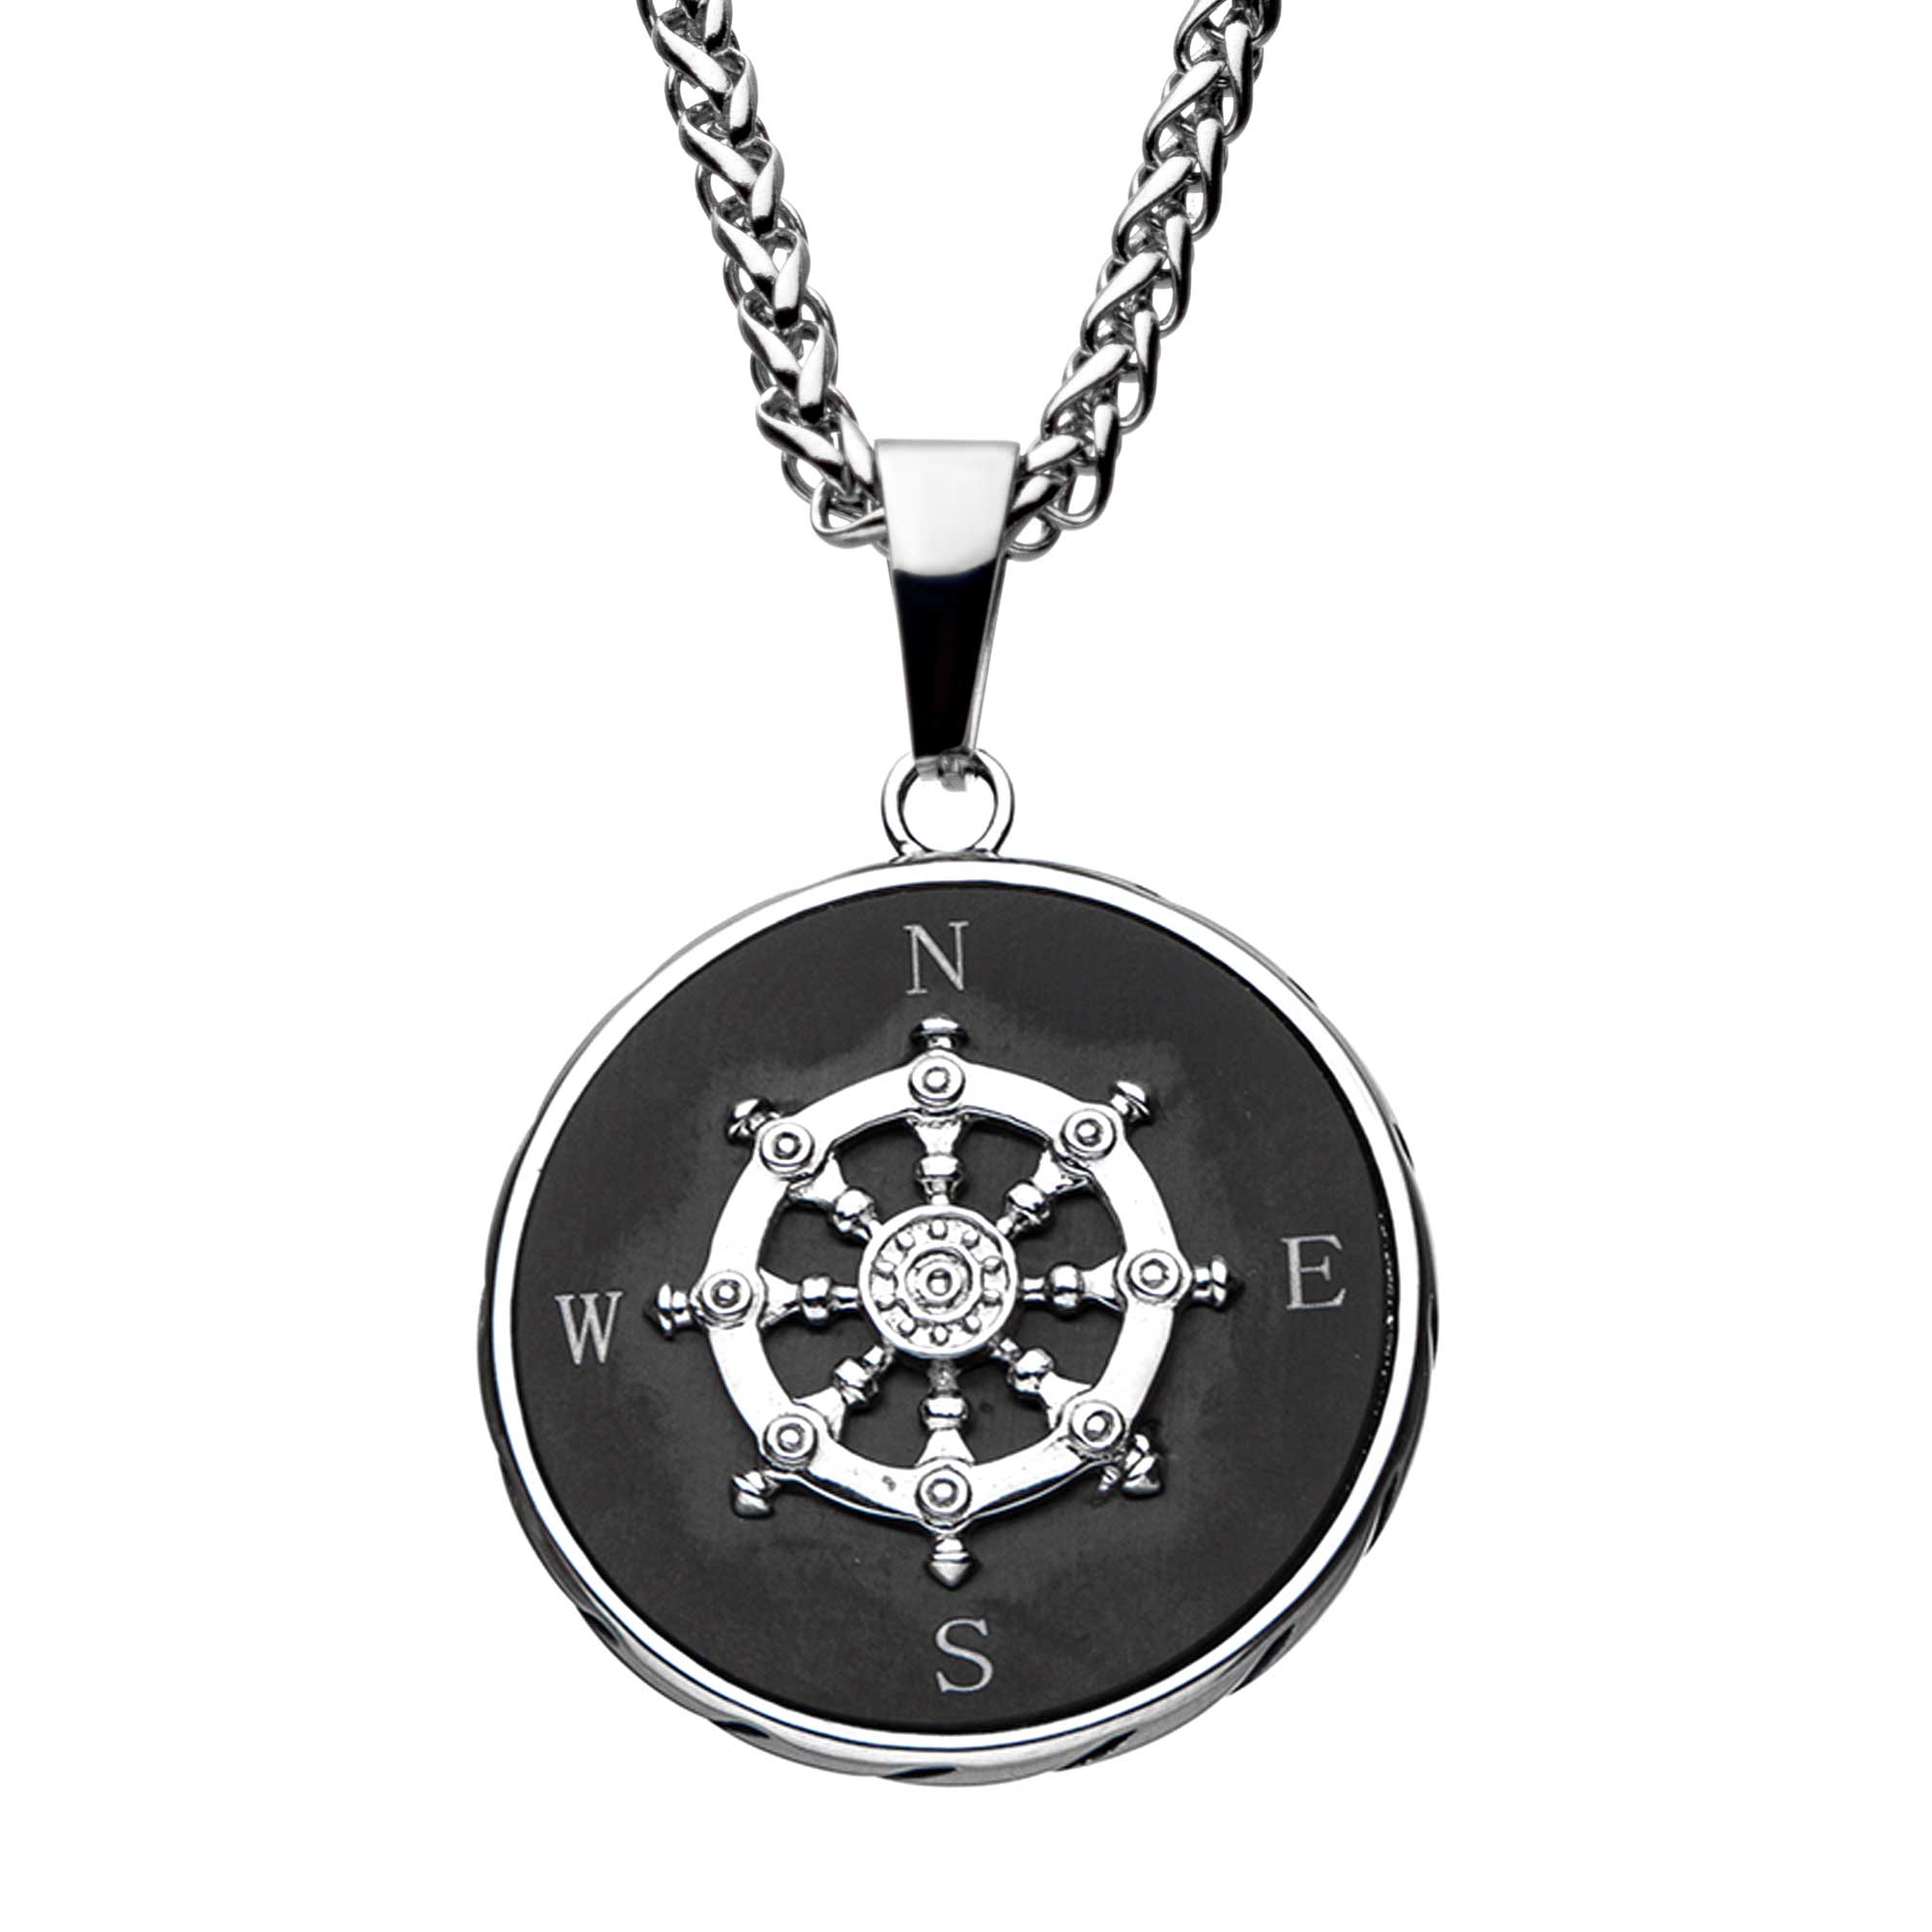 Stainless Steel Black Plated Ship's Wheel Compass Pendant with Chain Jayson Jewelers Cape Girardeau, MO